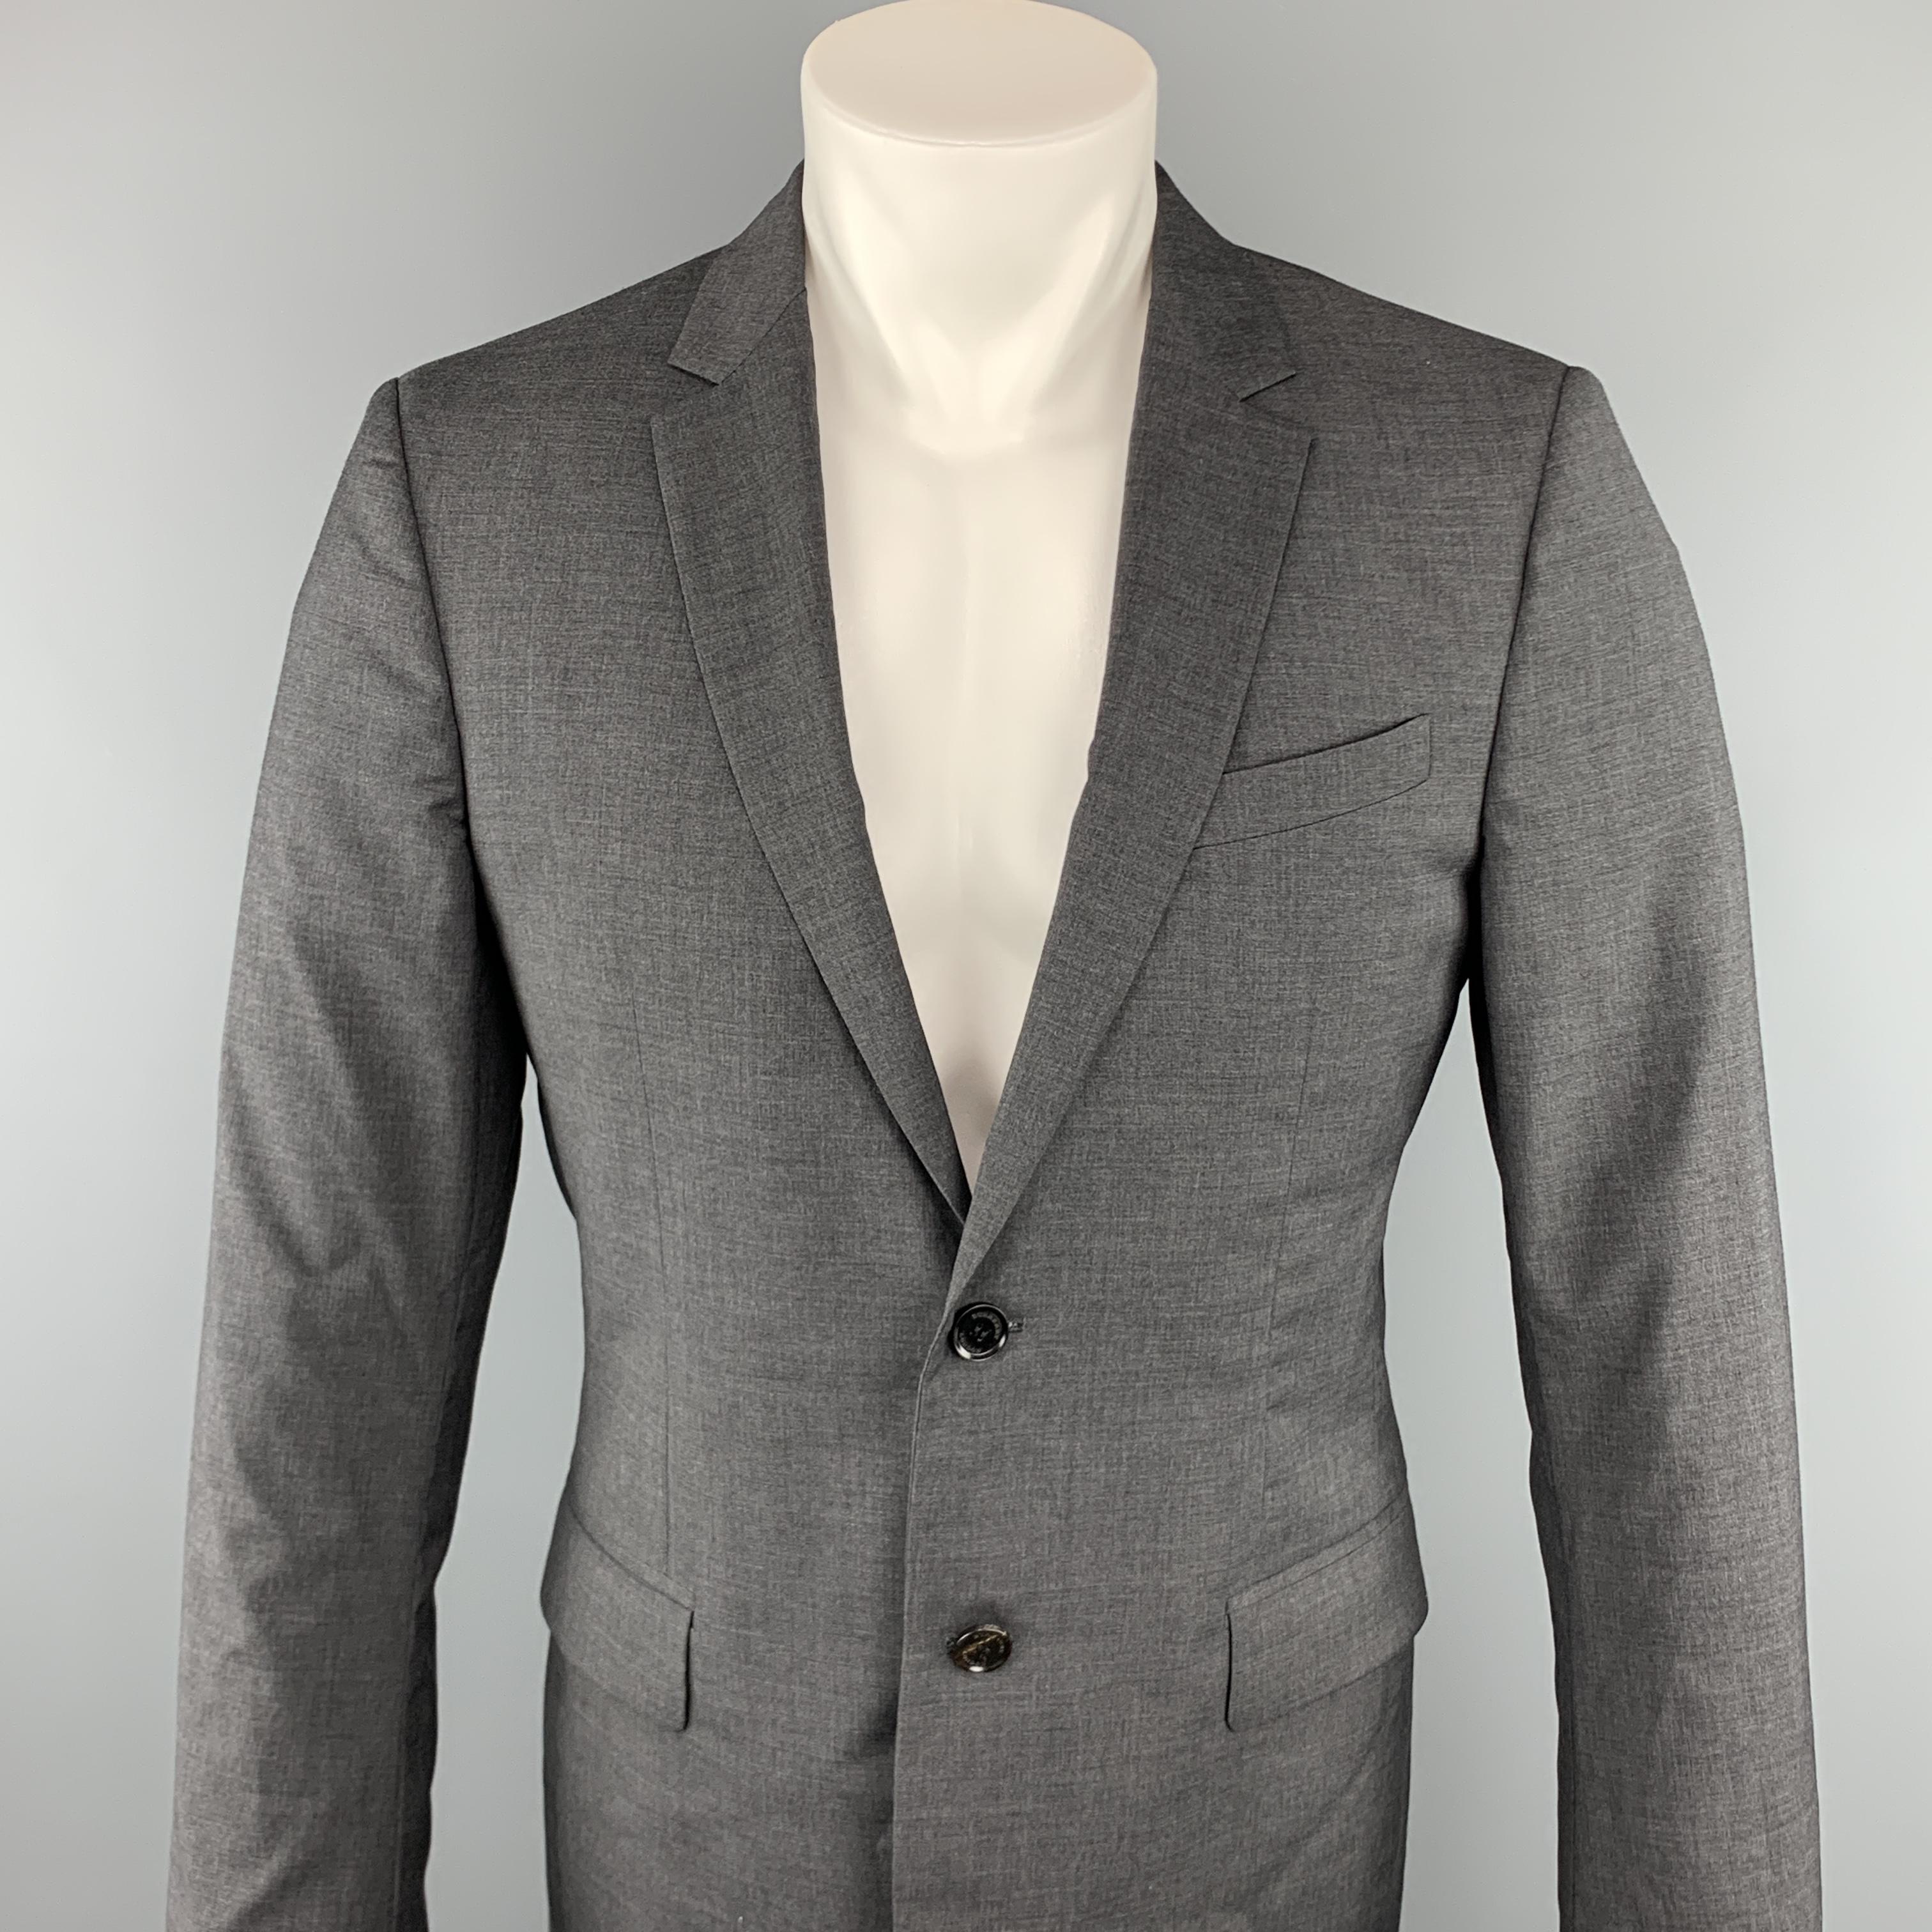 BURBERRY LONDON Sport Coat comes in a dark gray wool featuring a notch lapel style, front flap pockets, and a two button closure. Made in Italy.

Excellent Pre-Owned Condition.
Marked: 50 R

Measurements:

Shoulder: 17.5 in.
Chest: 40 in. 
Sleeve: